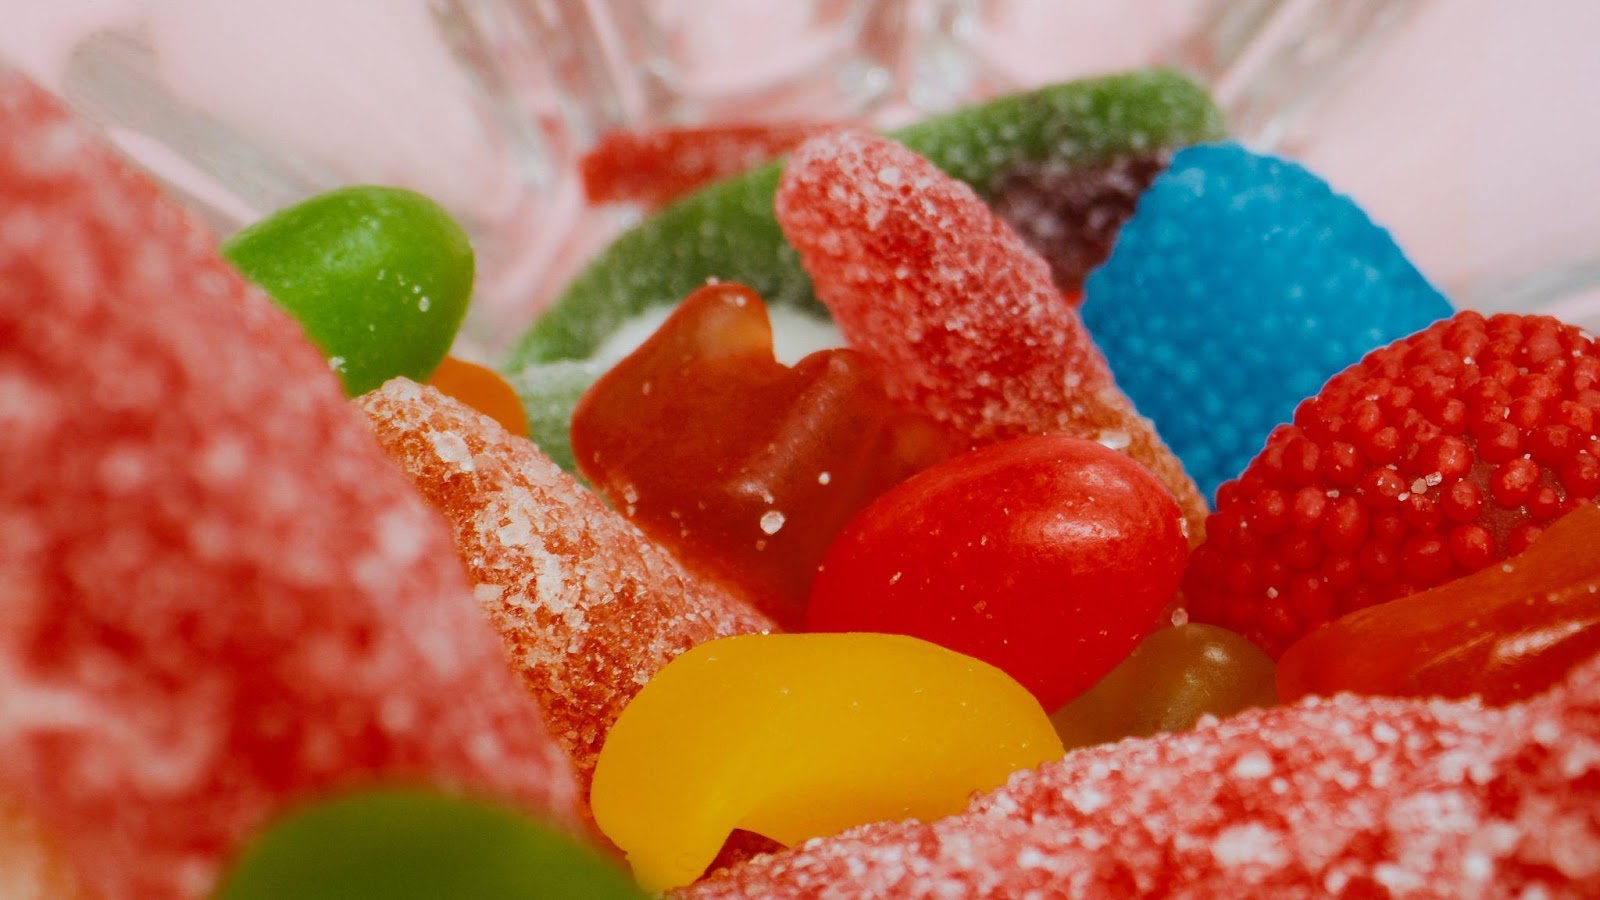 a close-up view of gummies in a glass